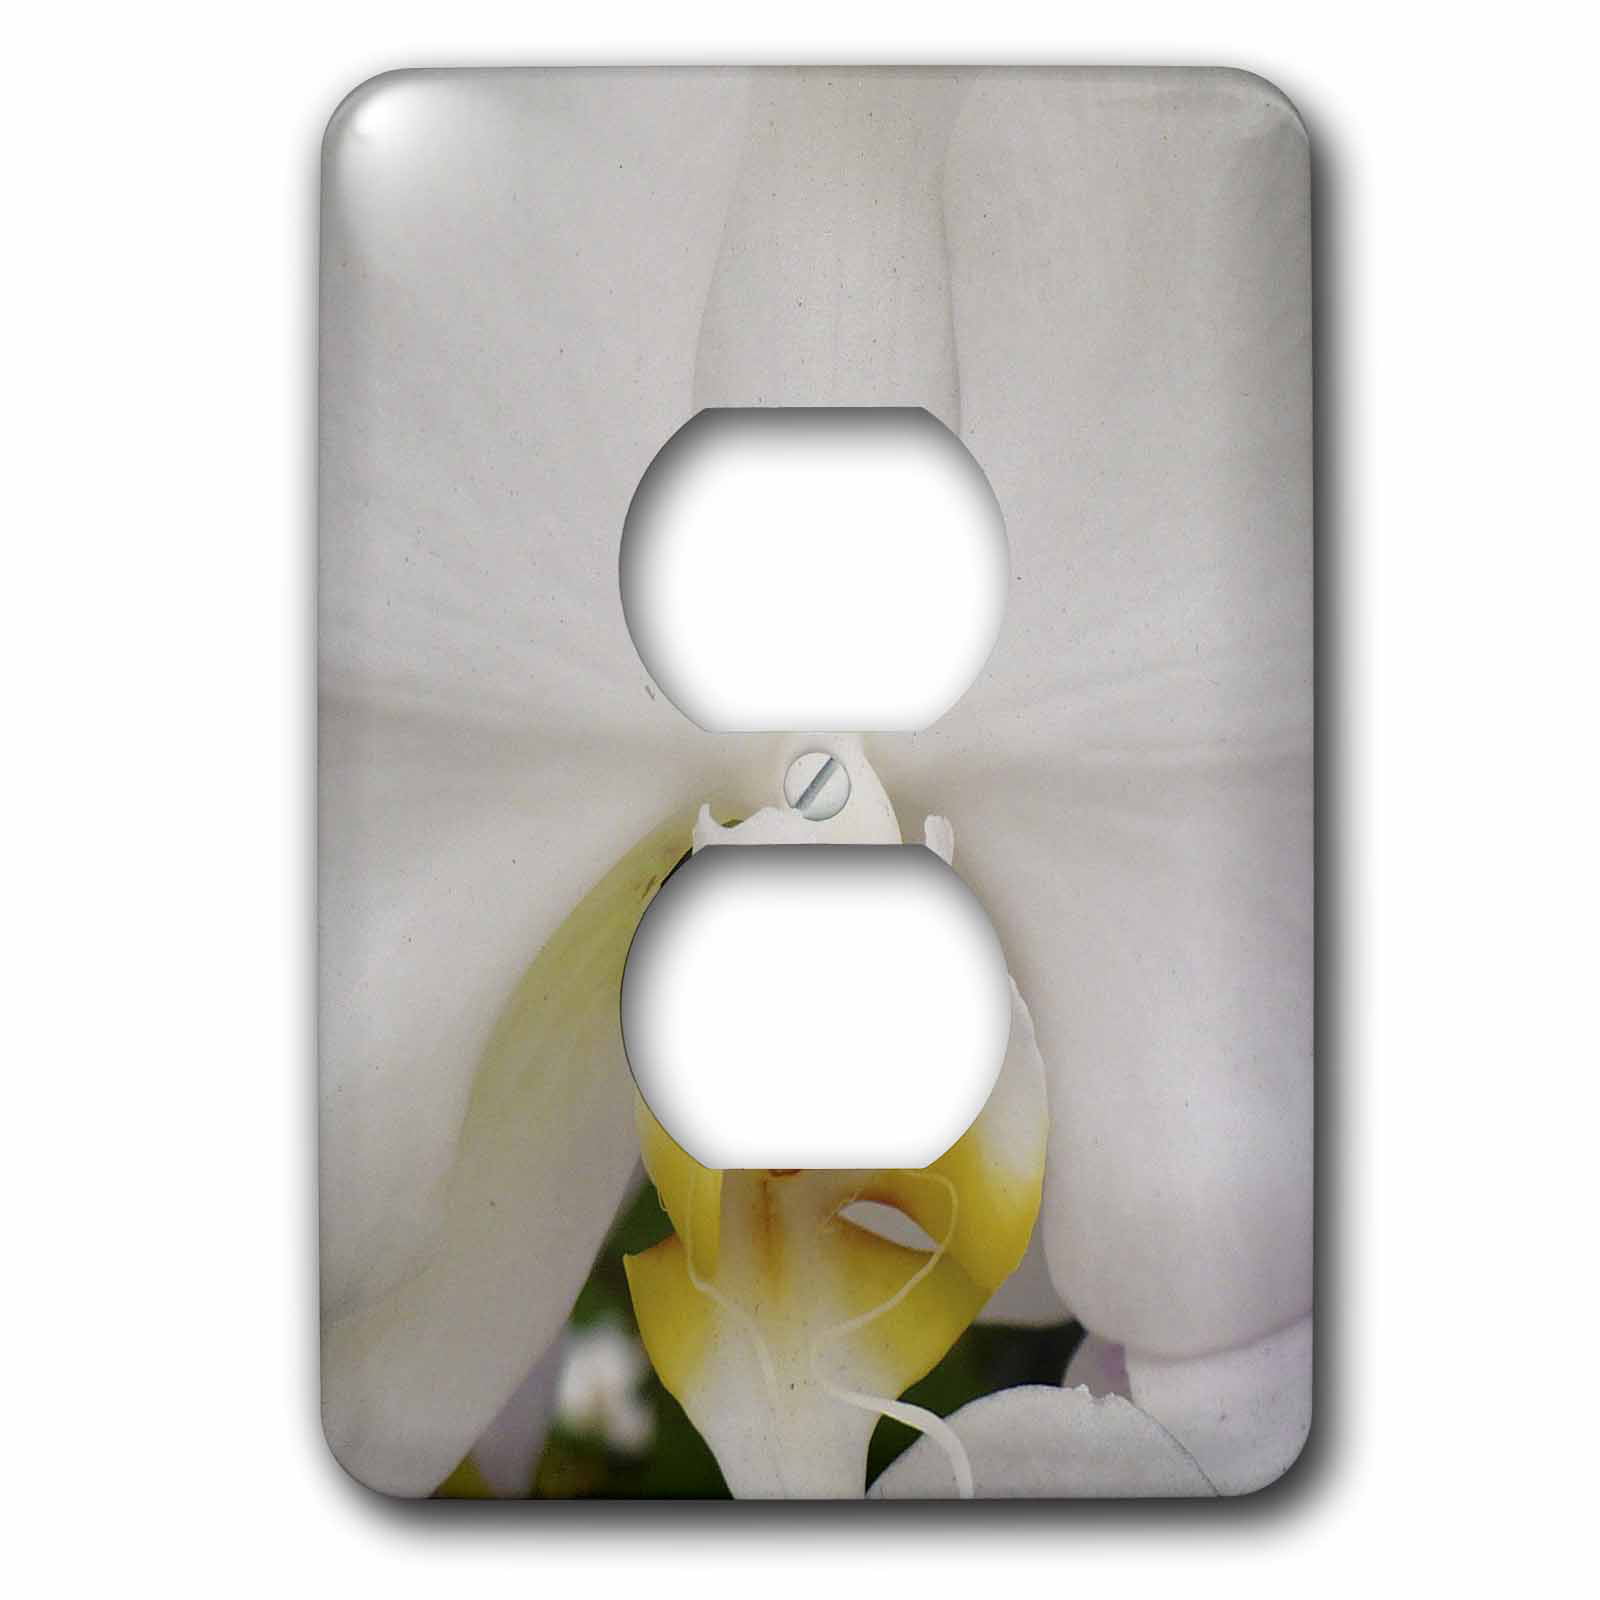 Multicolor 3dRose lsp_7455_6 Daisy Orchid 2 Plug Outlet Cover